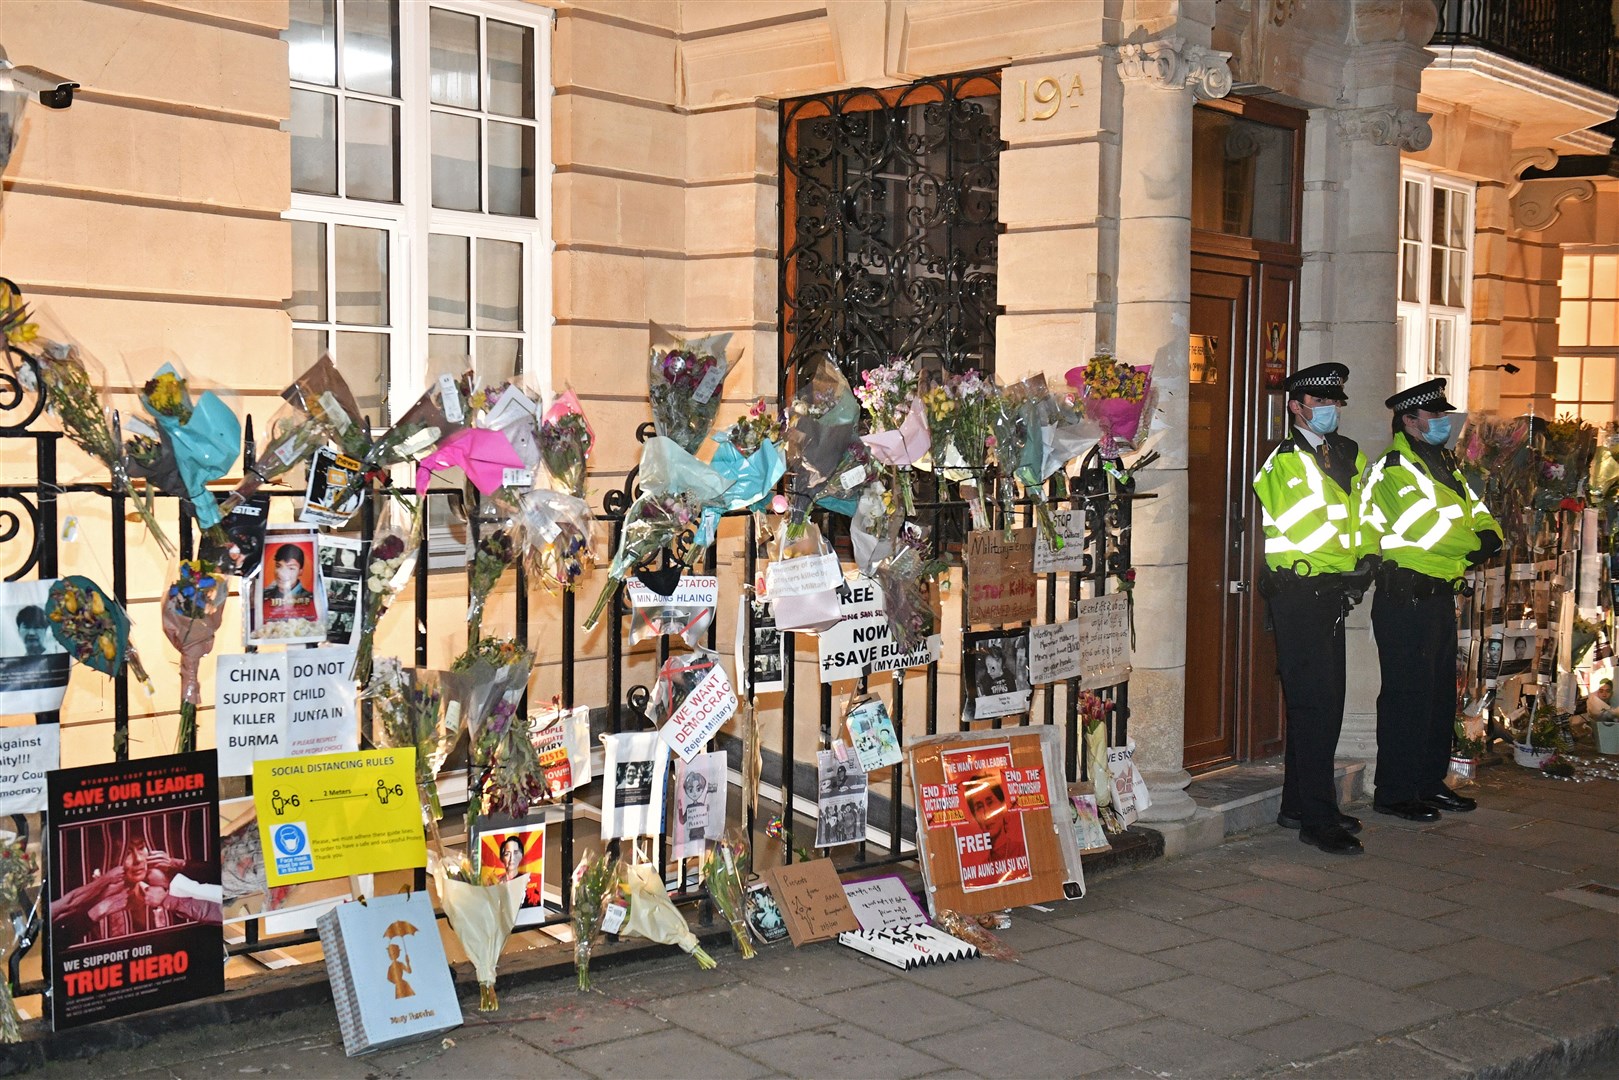 Flowers have been left outside the embassy (Dominic Lipinski/PA)